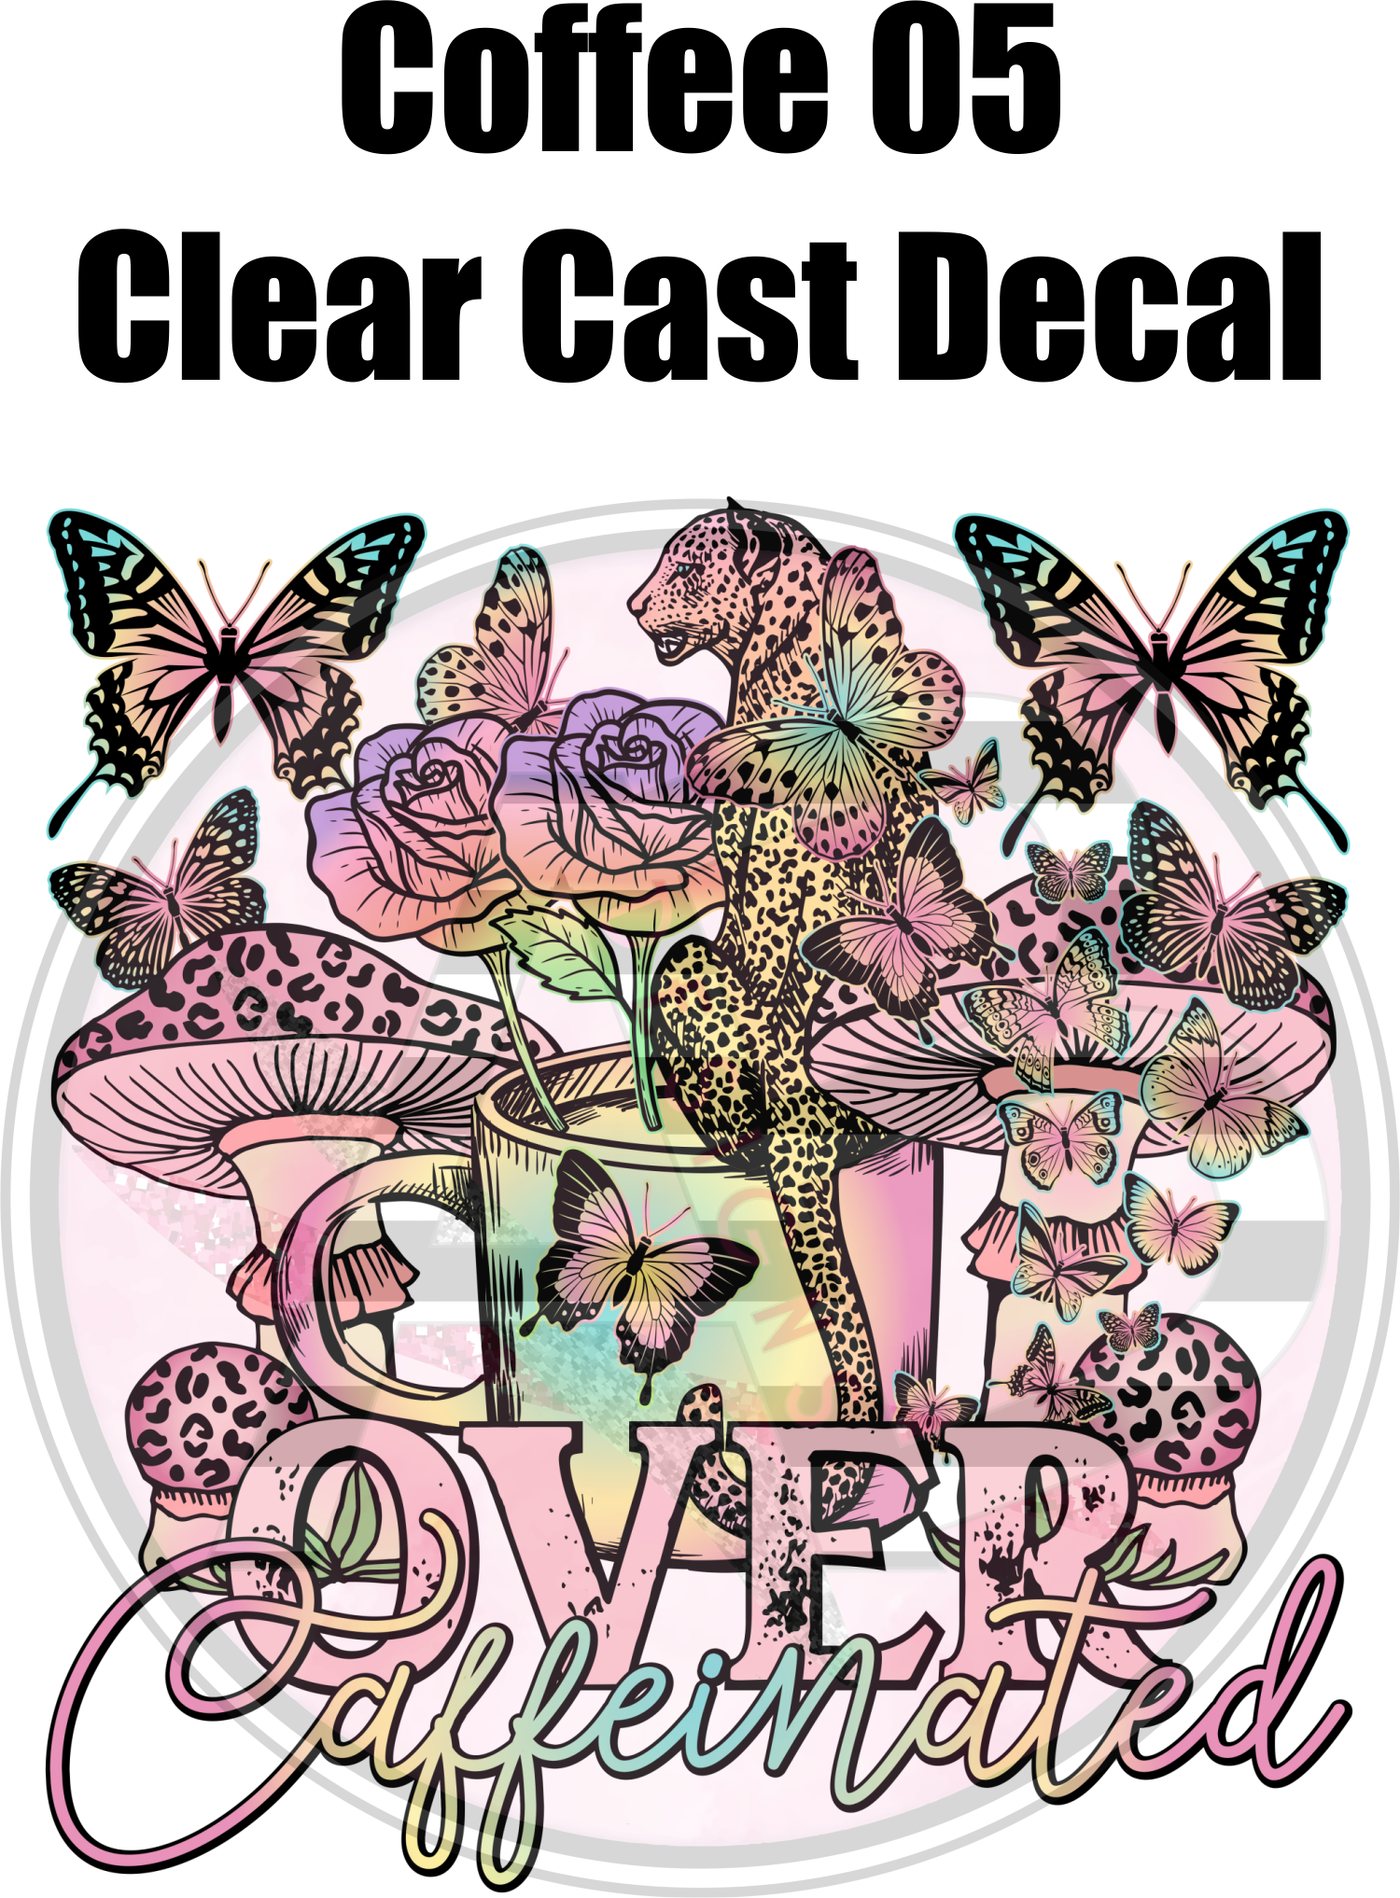 Coffee 5 - Clear Cast Decal